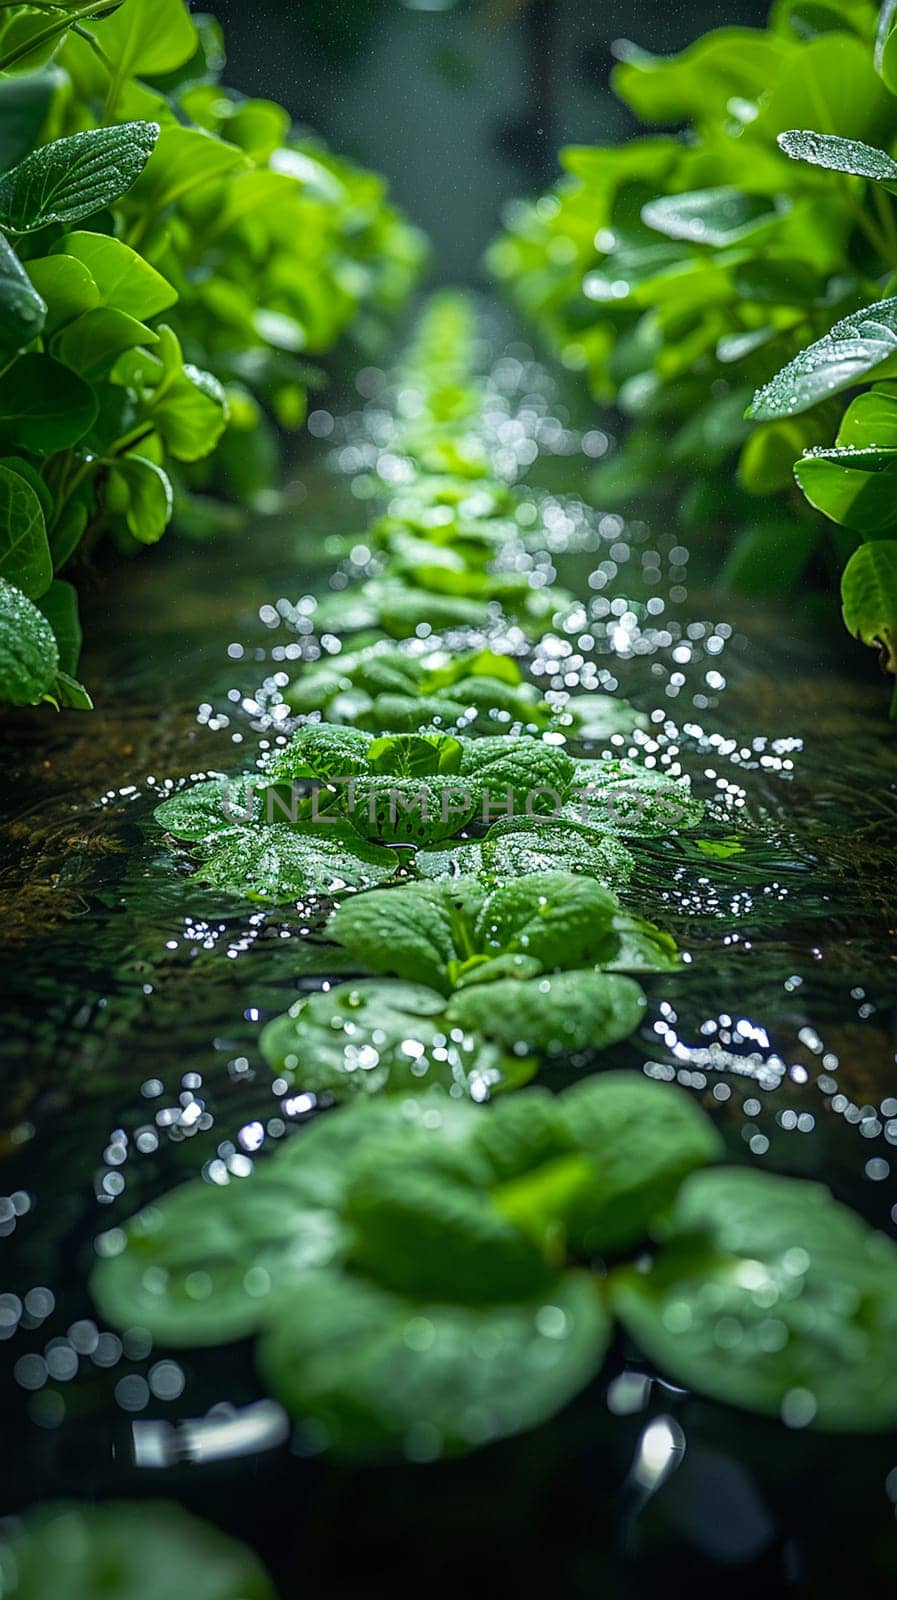 Aquaponics Innovation Leads Aquaculture in Business of Eco-Farming Futures by Benzoix